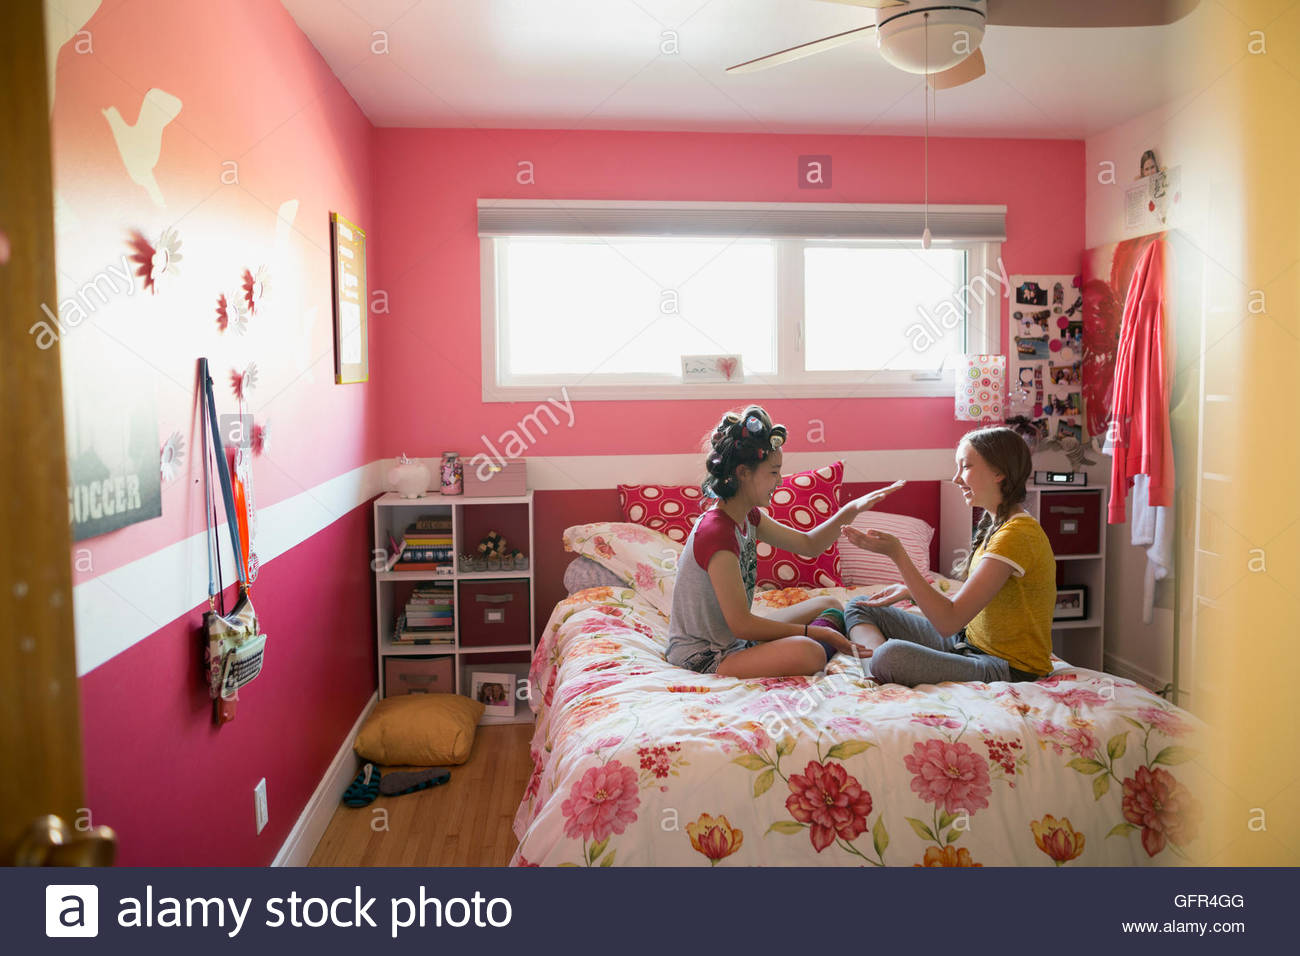 Girls playing clapping game on bed Stock Photo